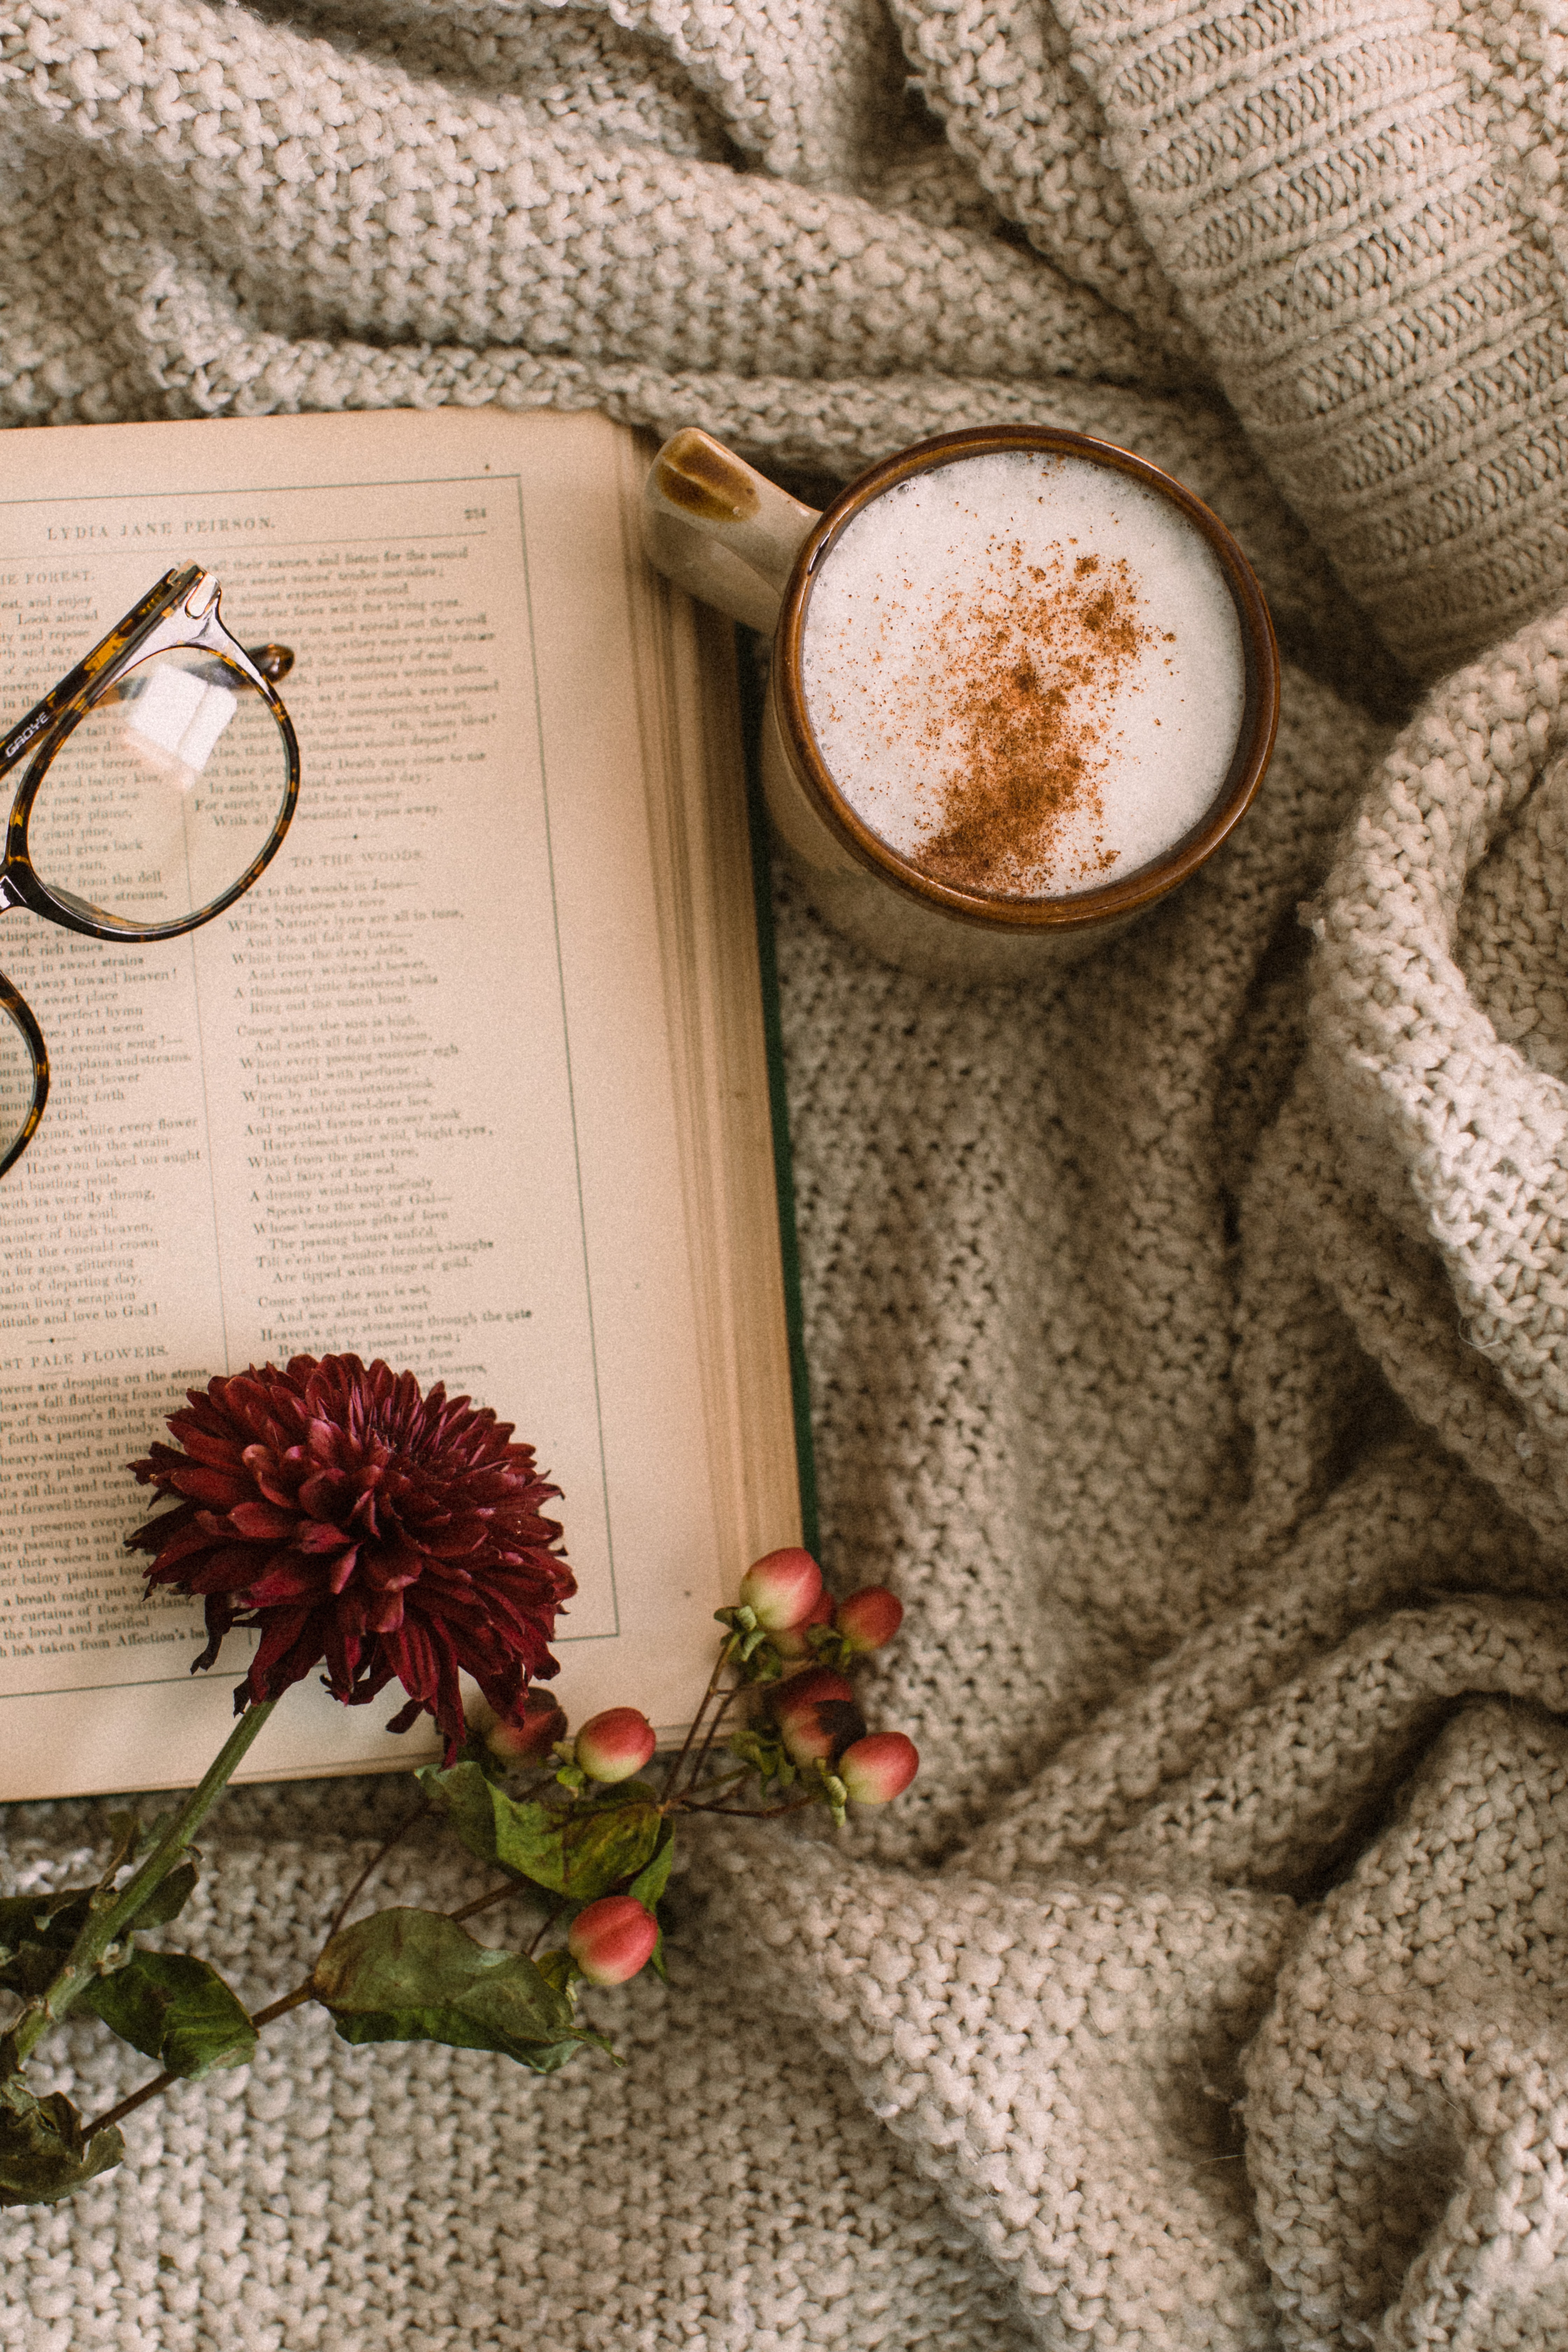 124612 Screensavers and Wallpapers Cappuccino for phone. Download spectacles, flowers, food, coffee, cup, book, cappuccino, glasses, mug pictures for free